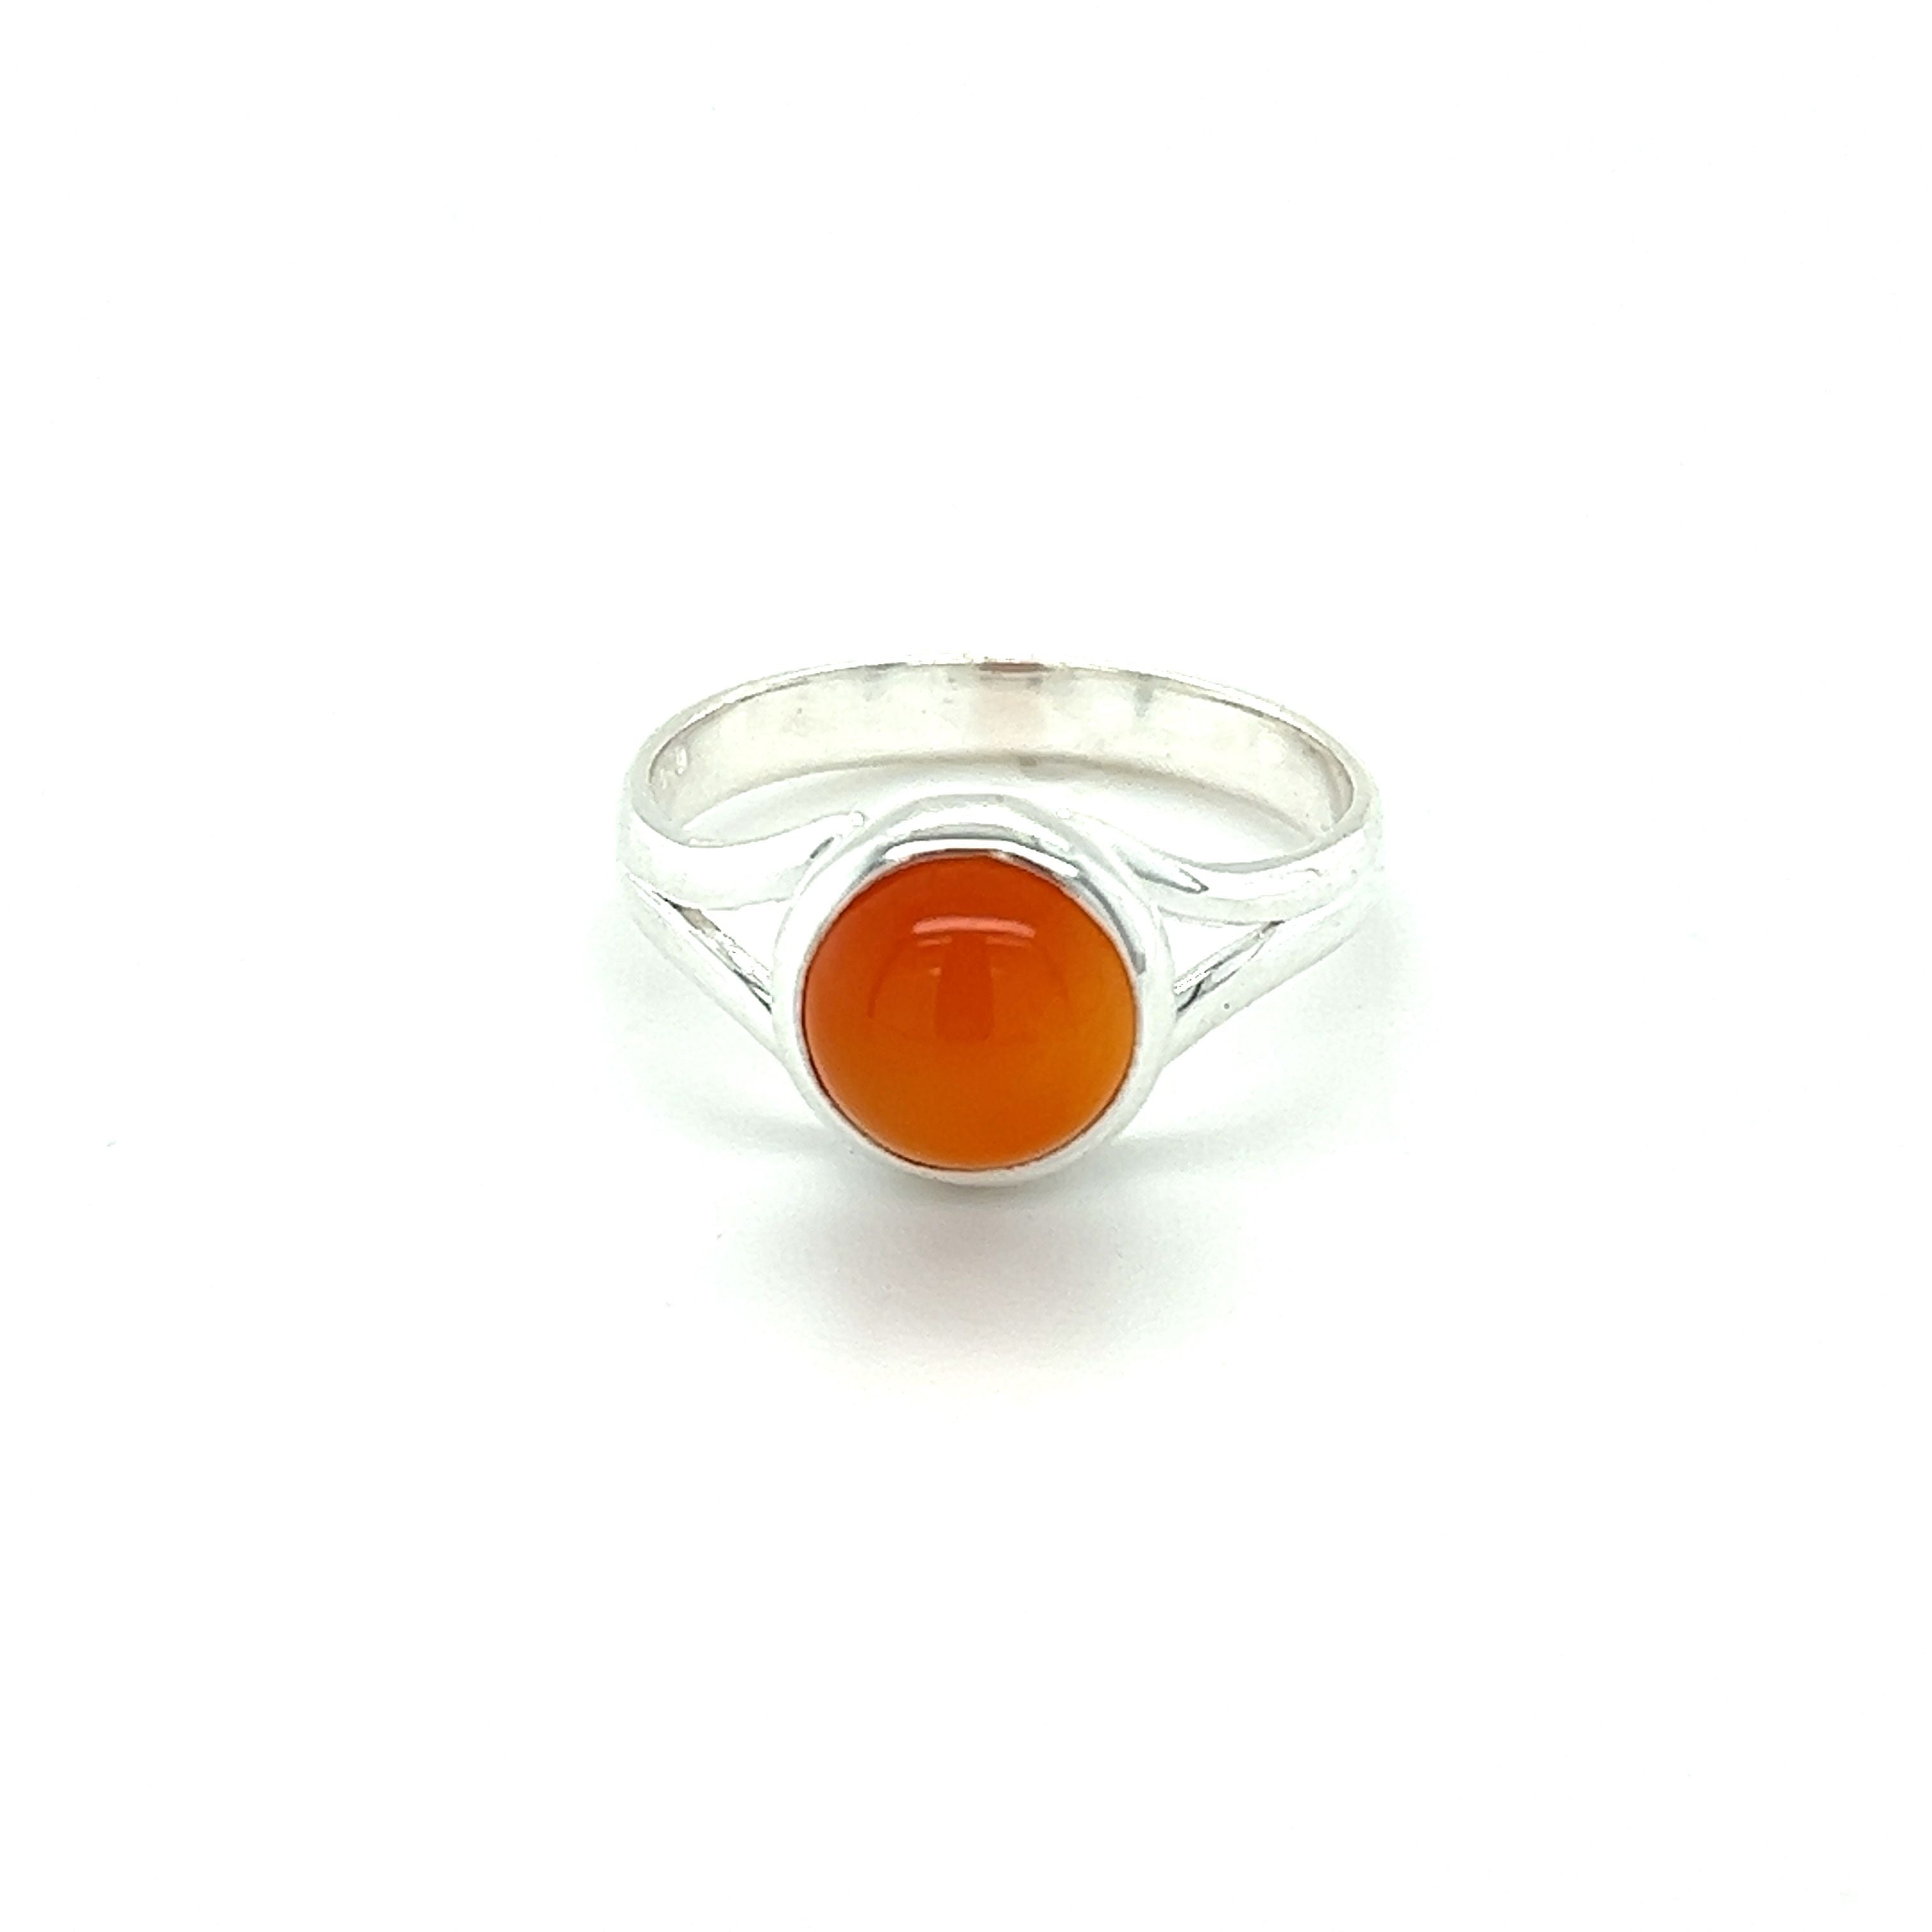 Opal Ring | Orange Opal (9 CT) Diamond & Two-Color 18K Gold Ring:  ashlandwatches.com